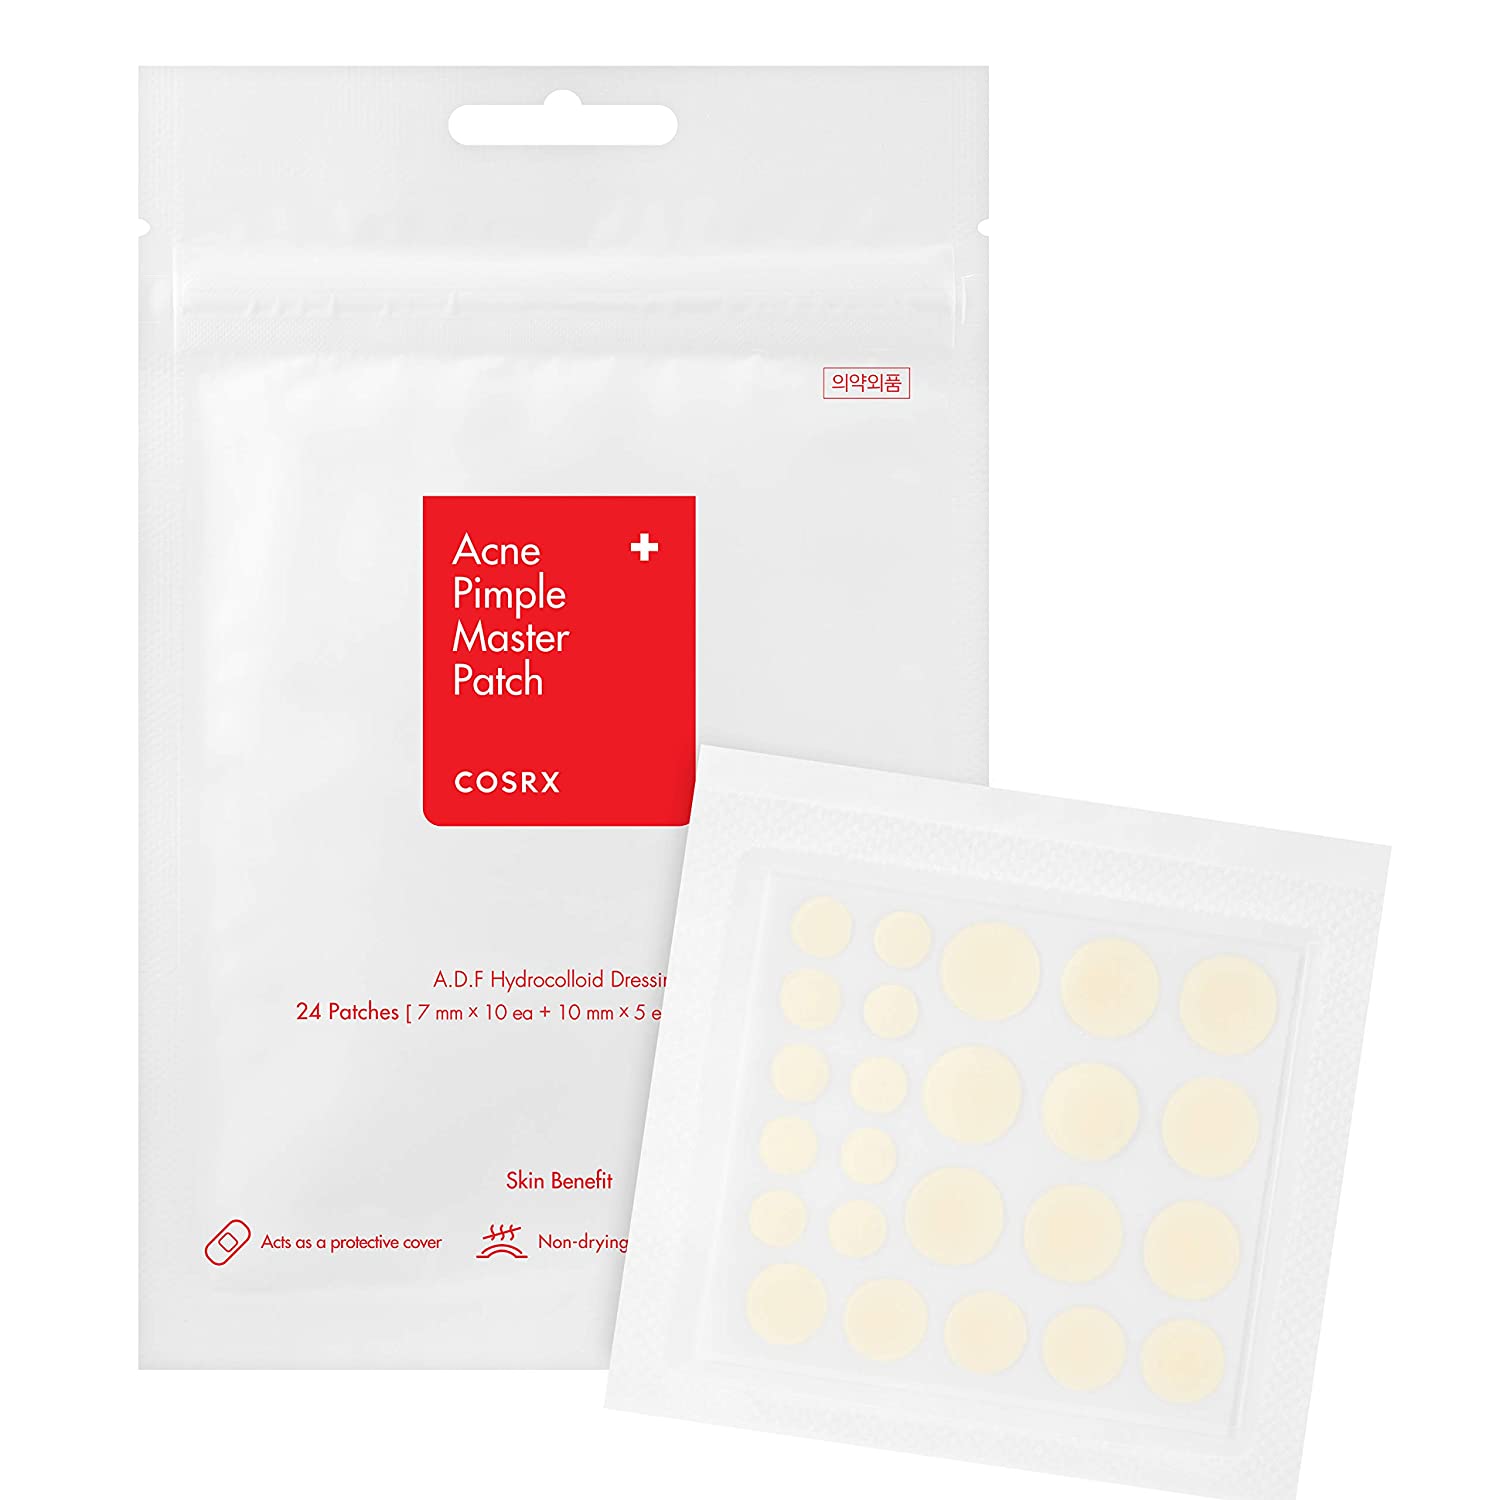 Best Treatment For Acne On The Cheeks: COSRX Acne Pimple Master Patch